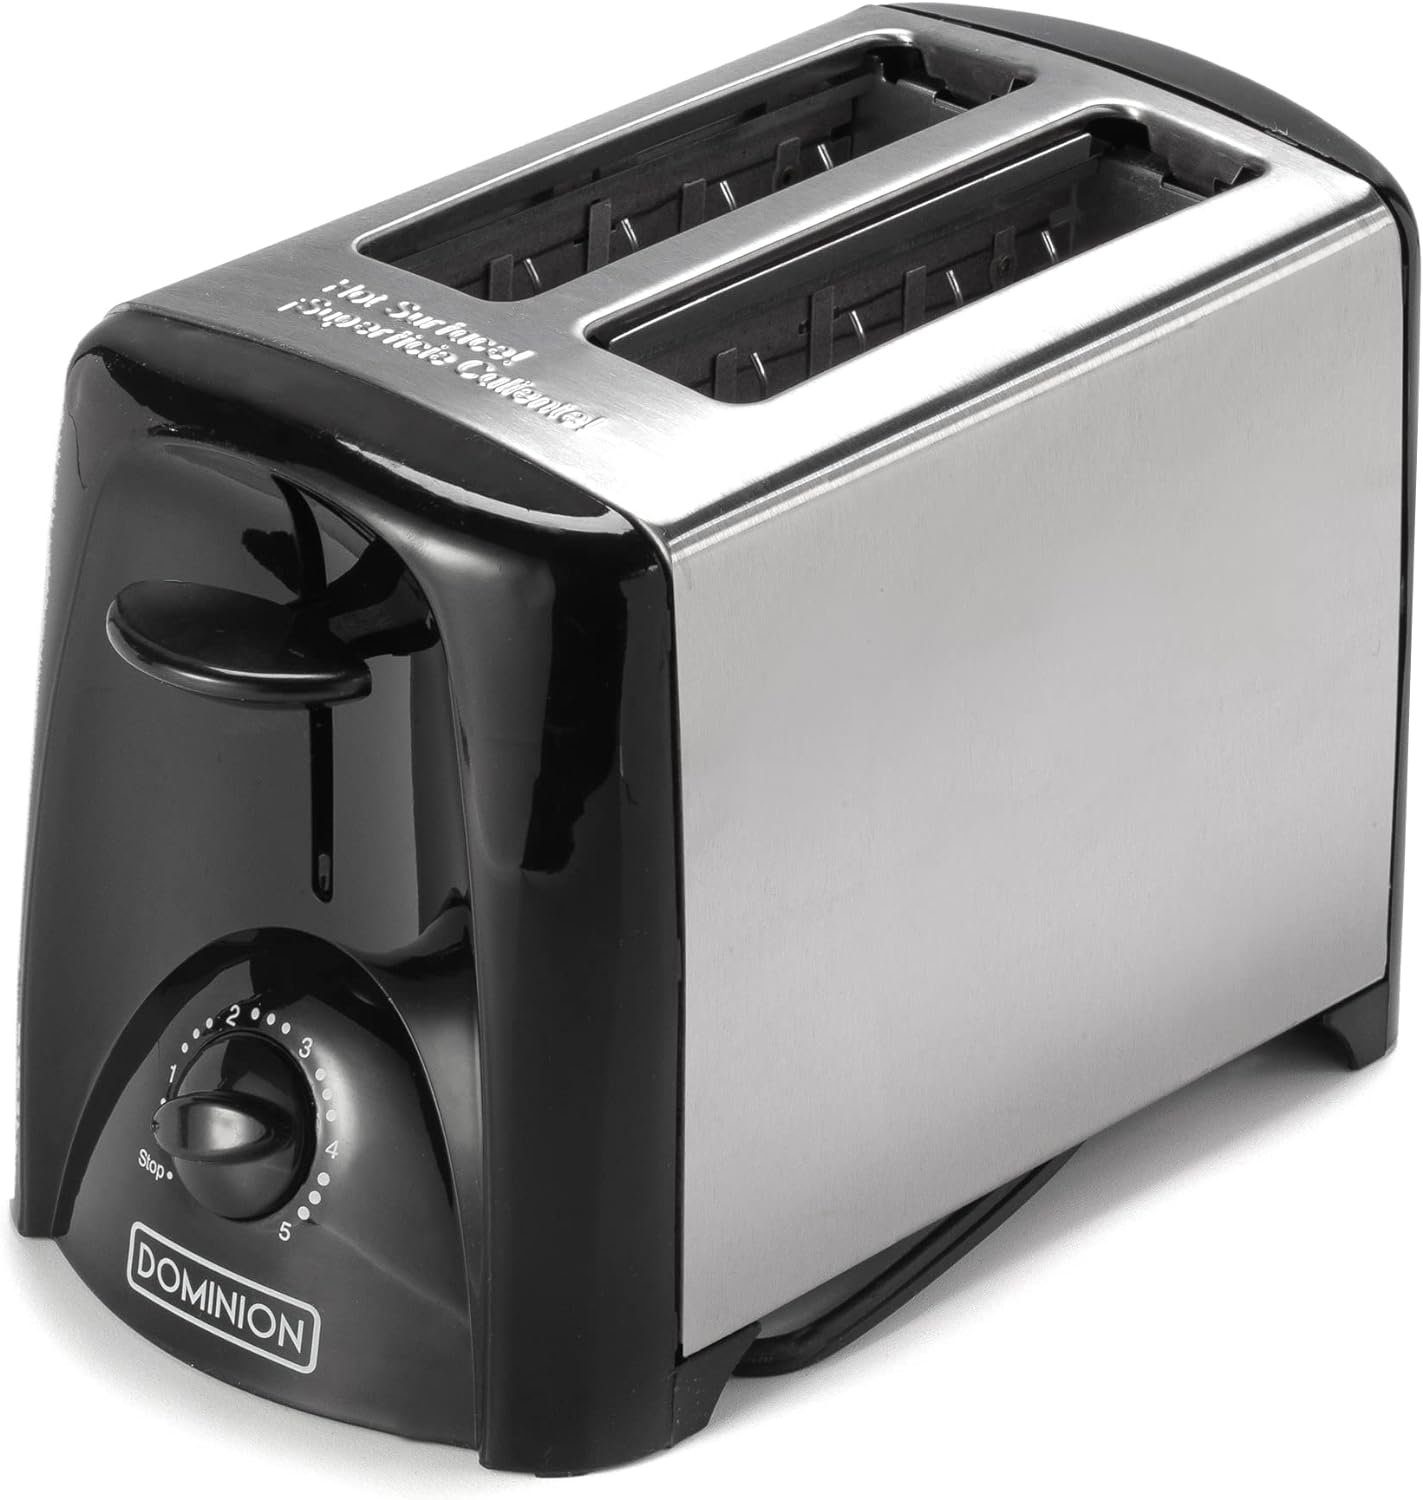 Dominion 2-Slice Toaster with Shade Control, Slide-Out Crumb Tray, Auto-Shutoff, Toast Lift, Brushed Stainless Steel/Black